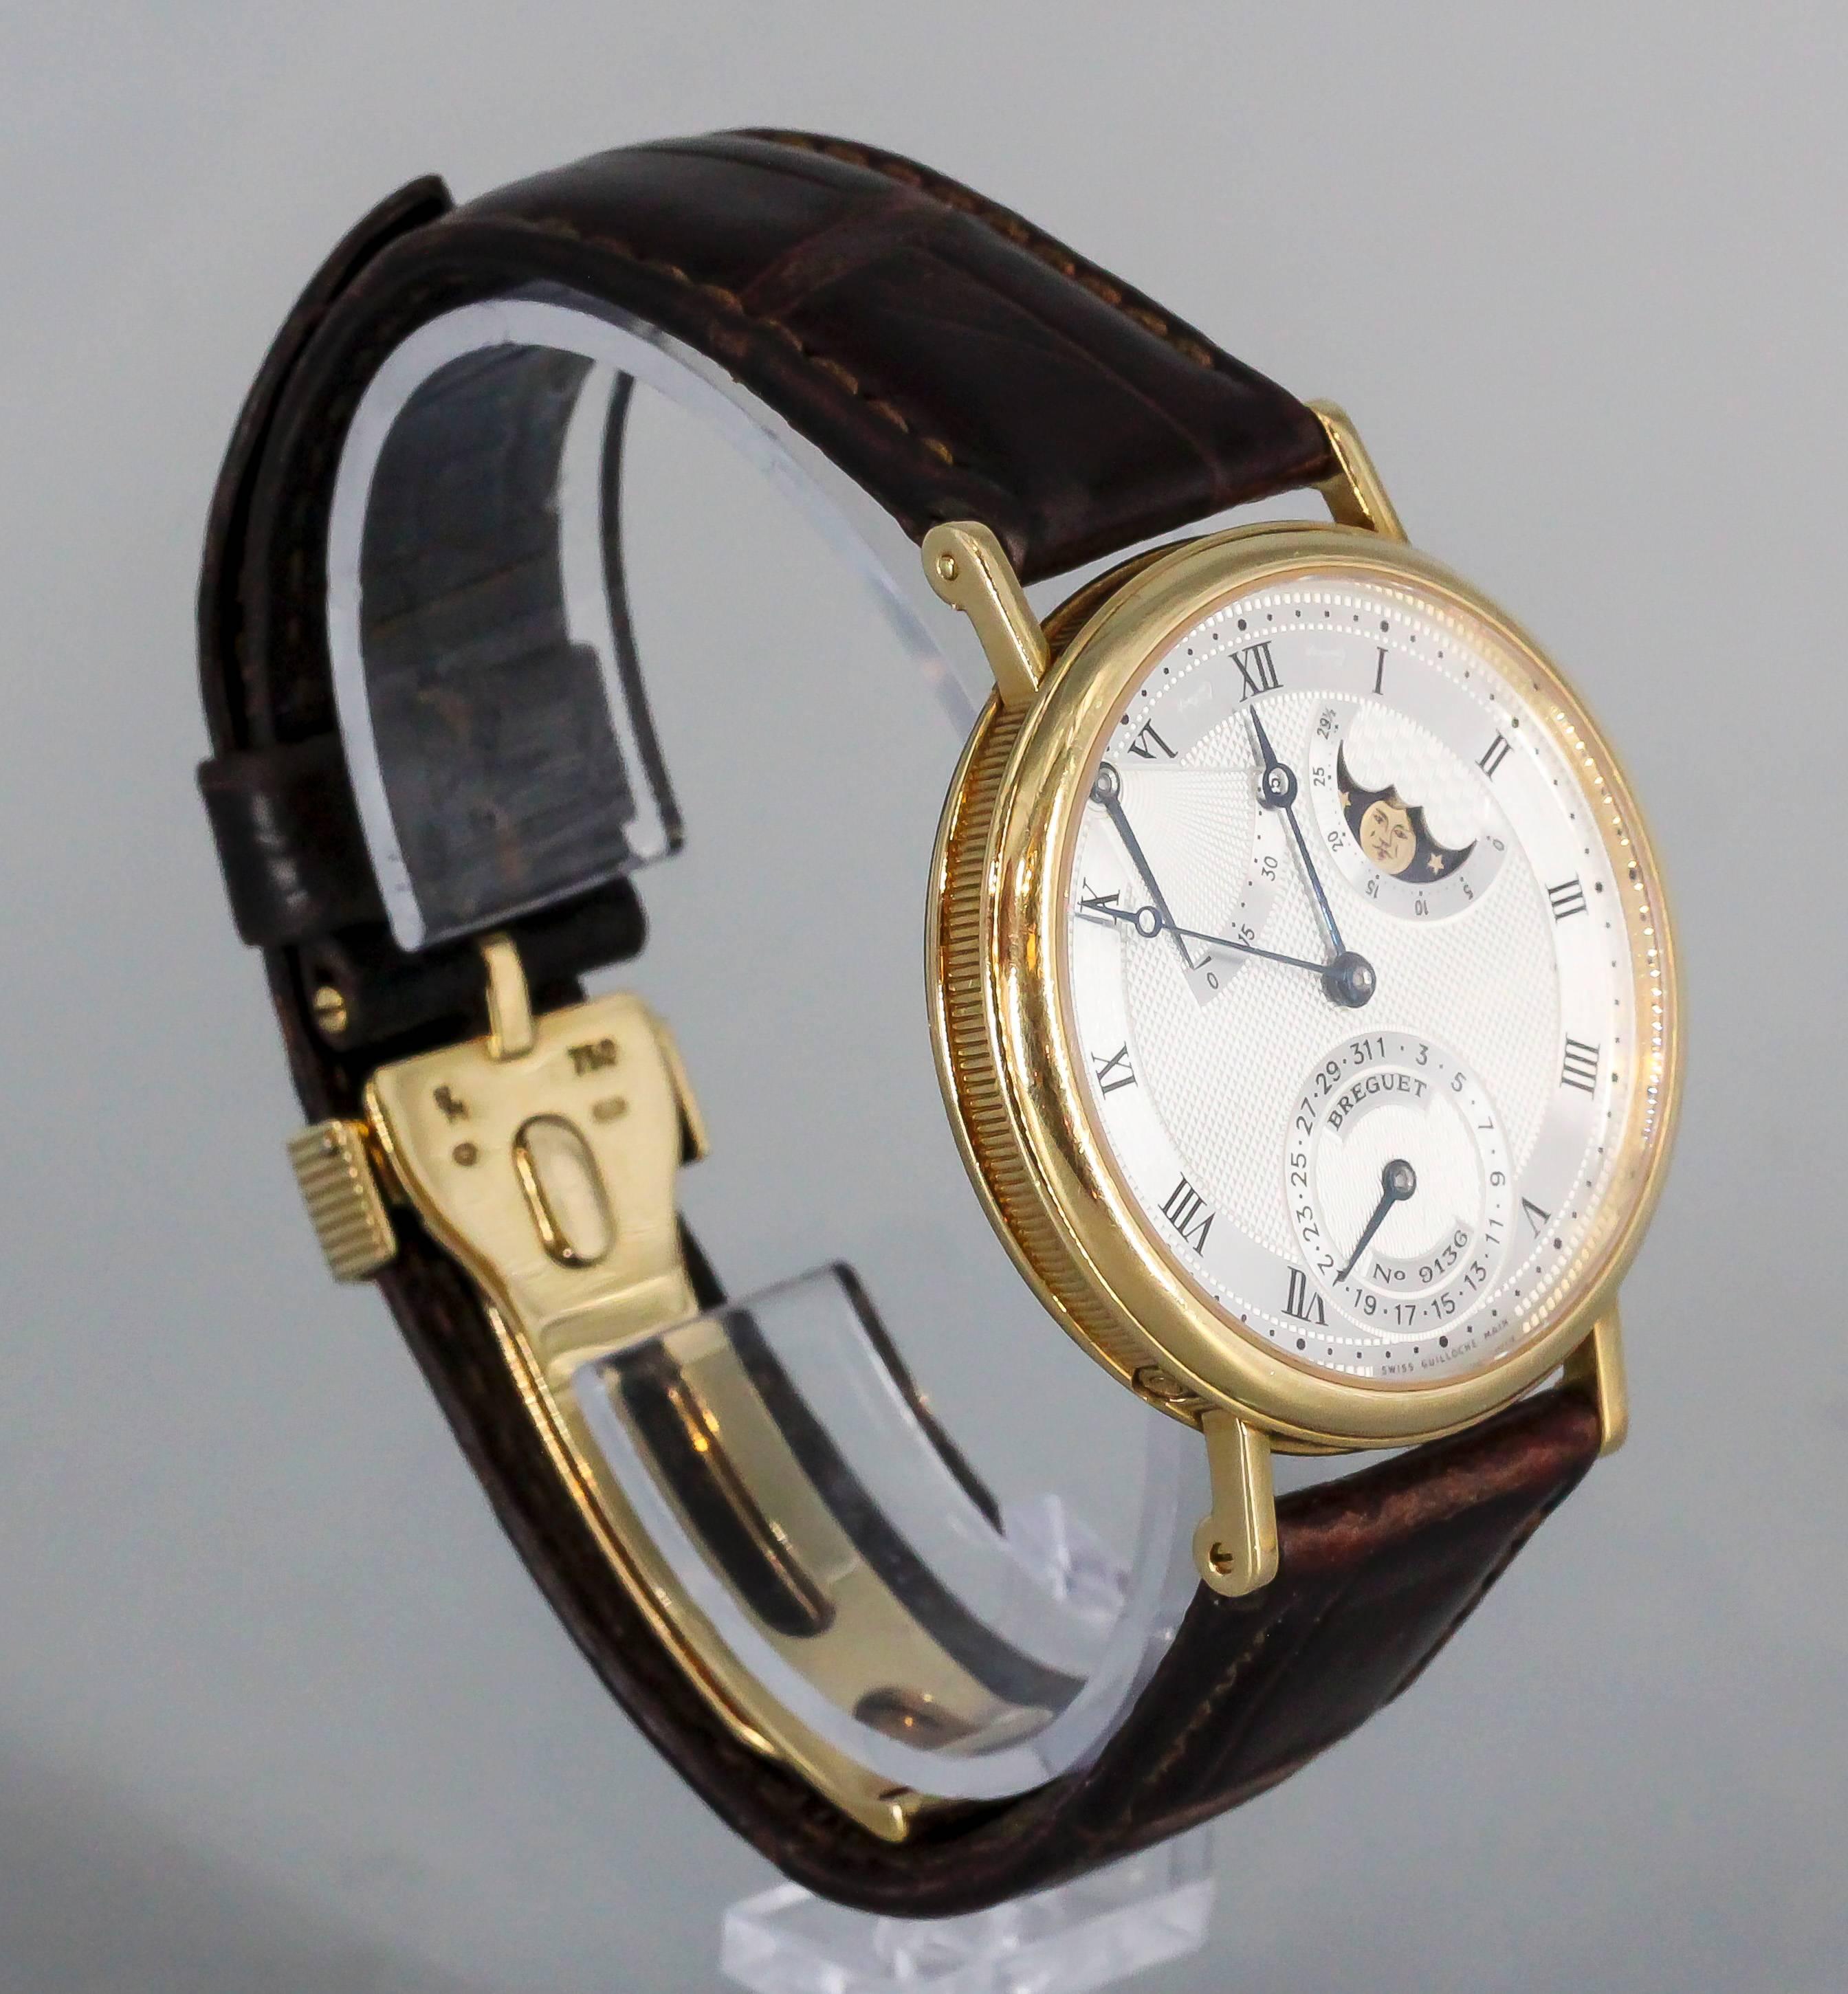 Elegant 18K yellow gold wrist watch from the 